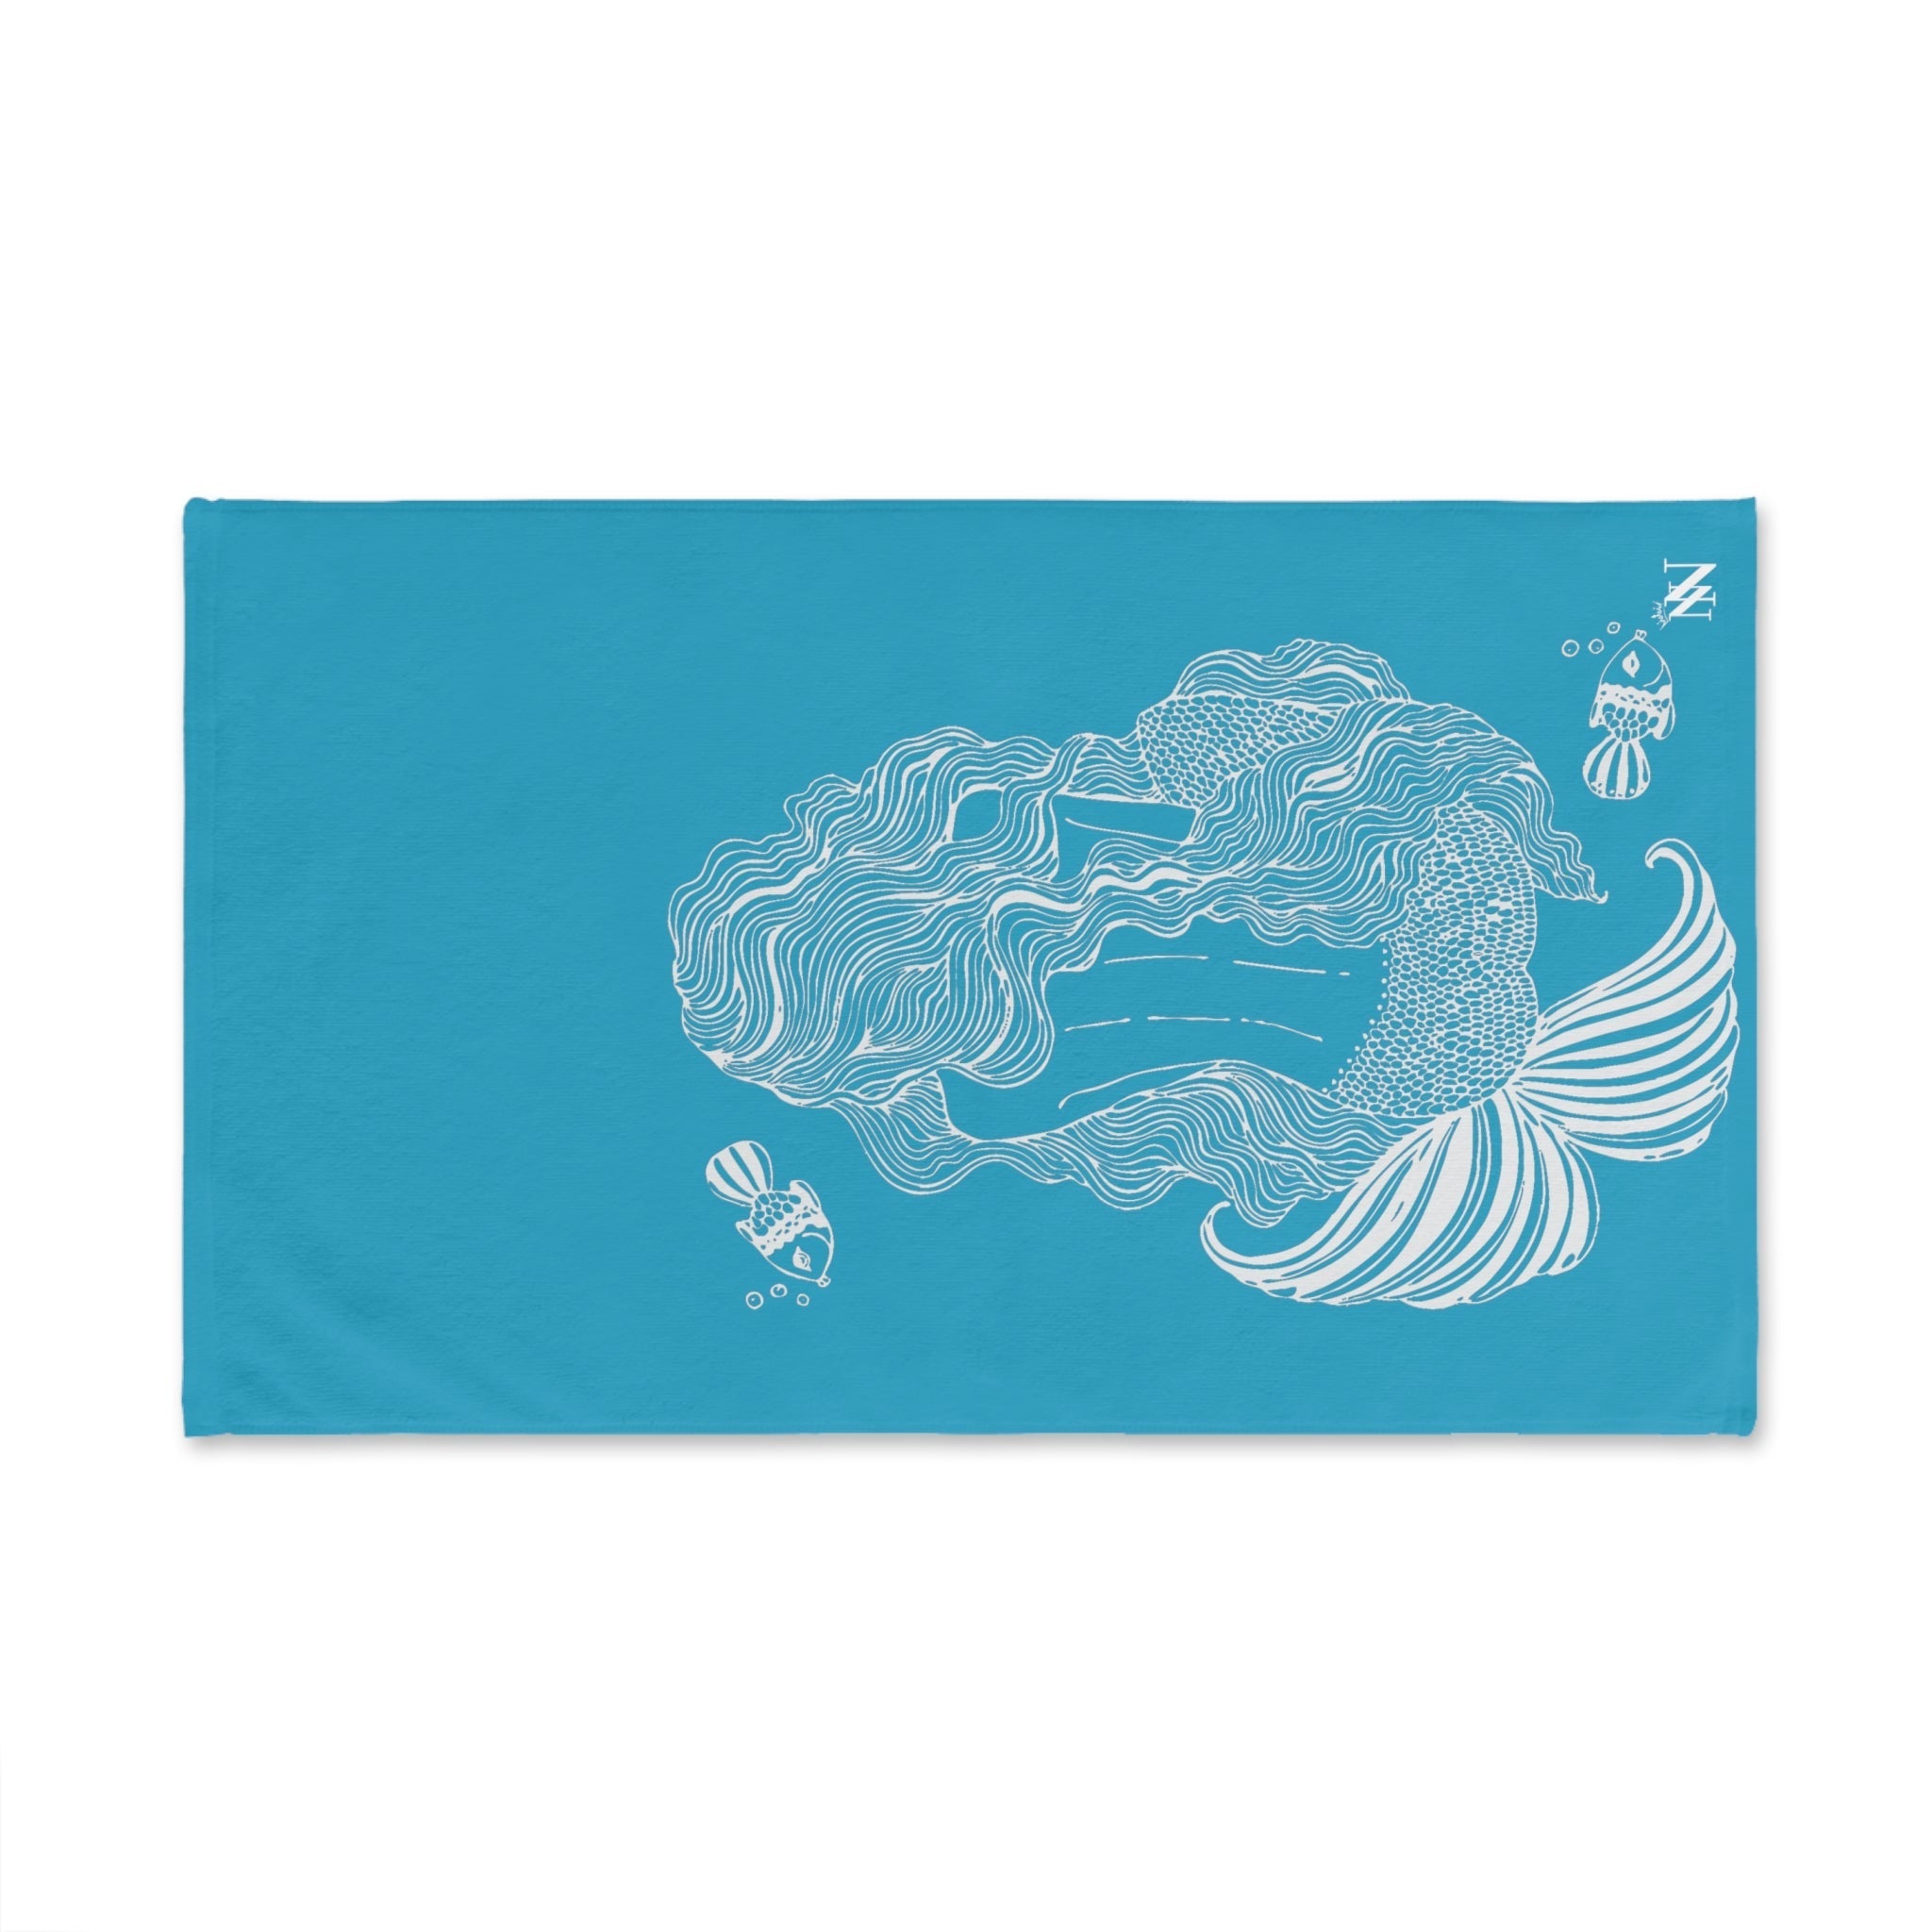 Back Mermaid Sea Teal | Novelty Gifts for Boyfriend, Funny Towel Romantic Gift for Wedding Couple Fiance First Year Anniversary Valentines, Party Gag Gifts, Joke Humor Cloth for Husband Men BF NECTAR NAPKINS